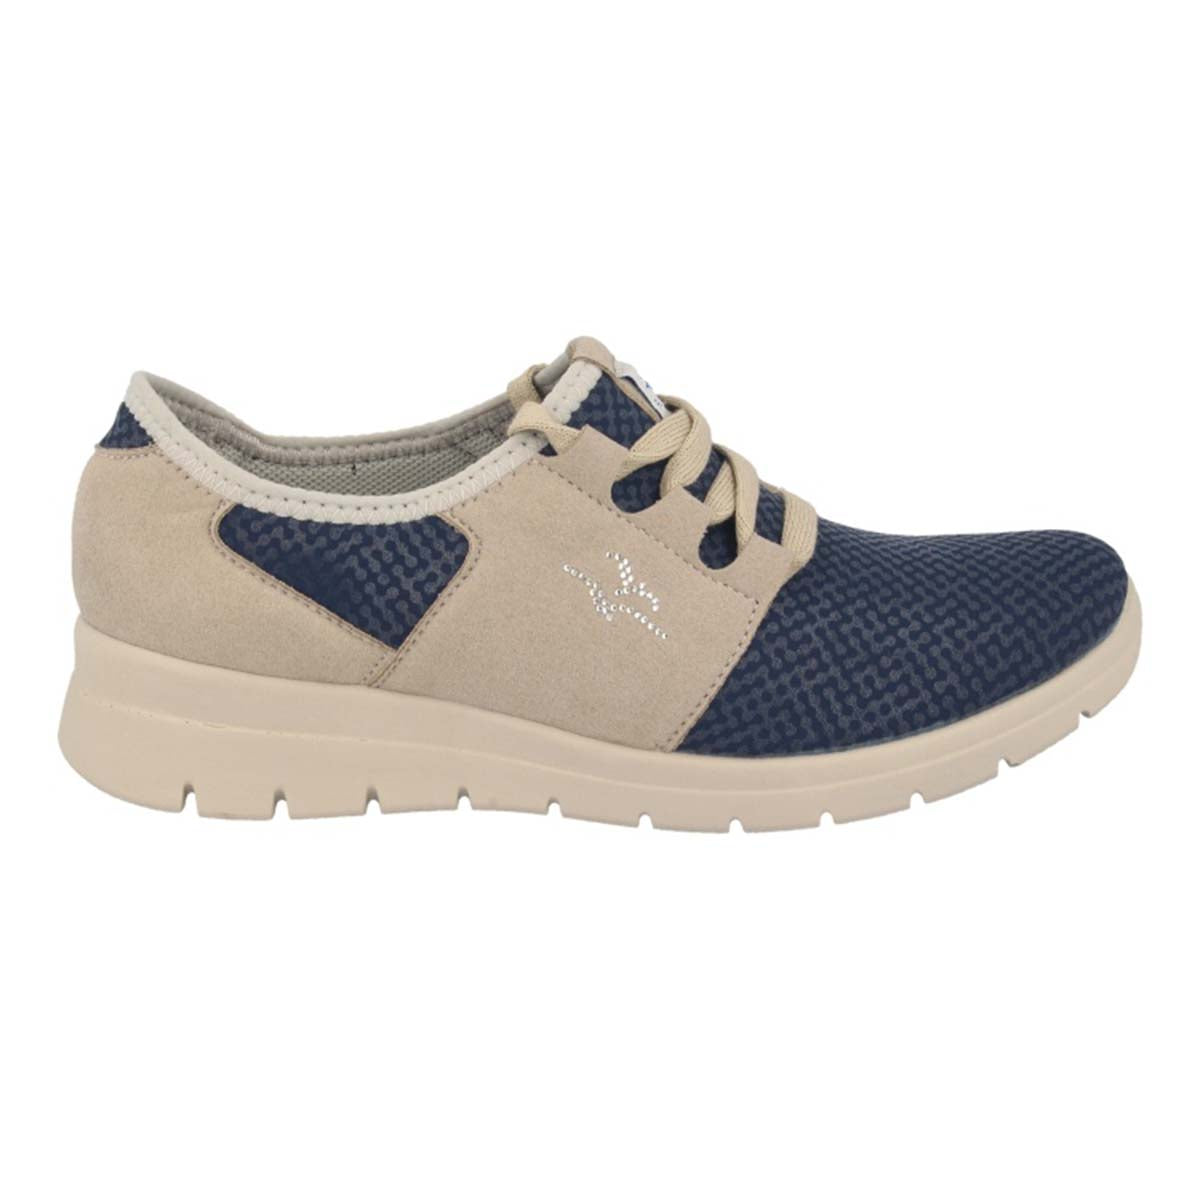 See the Lace-Up Sneakers Women Shoes in the colour BEIGE, available in various sizes